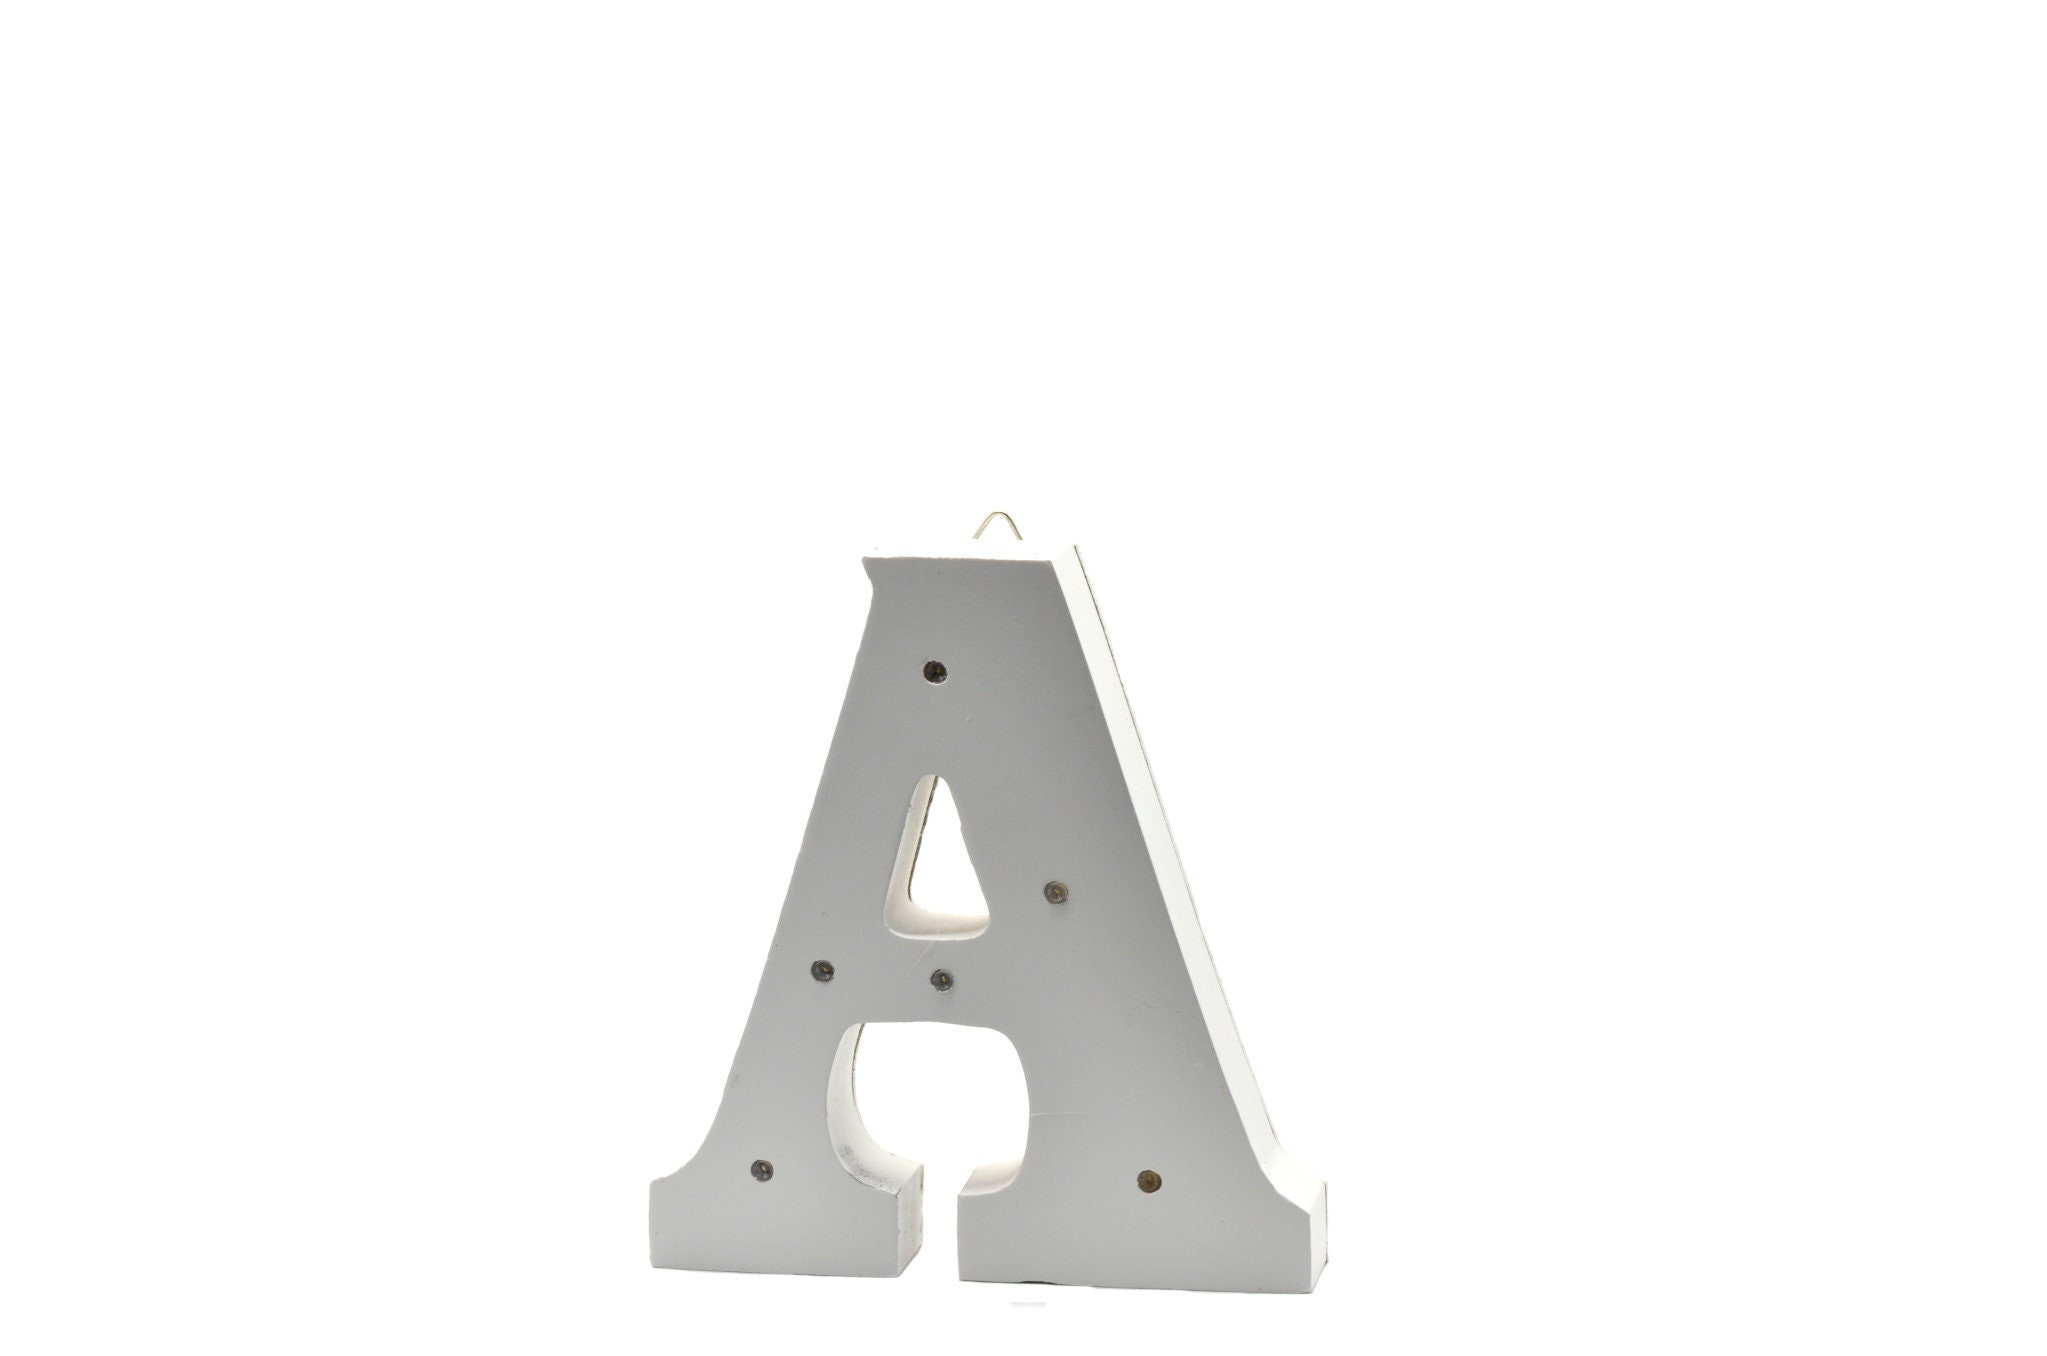 White Wood Letters 6 Inch, Wood Letters for DIY, Party Projects (X)